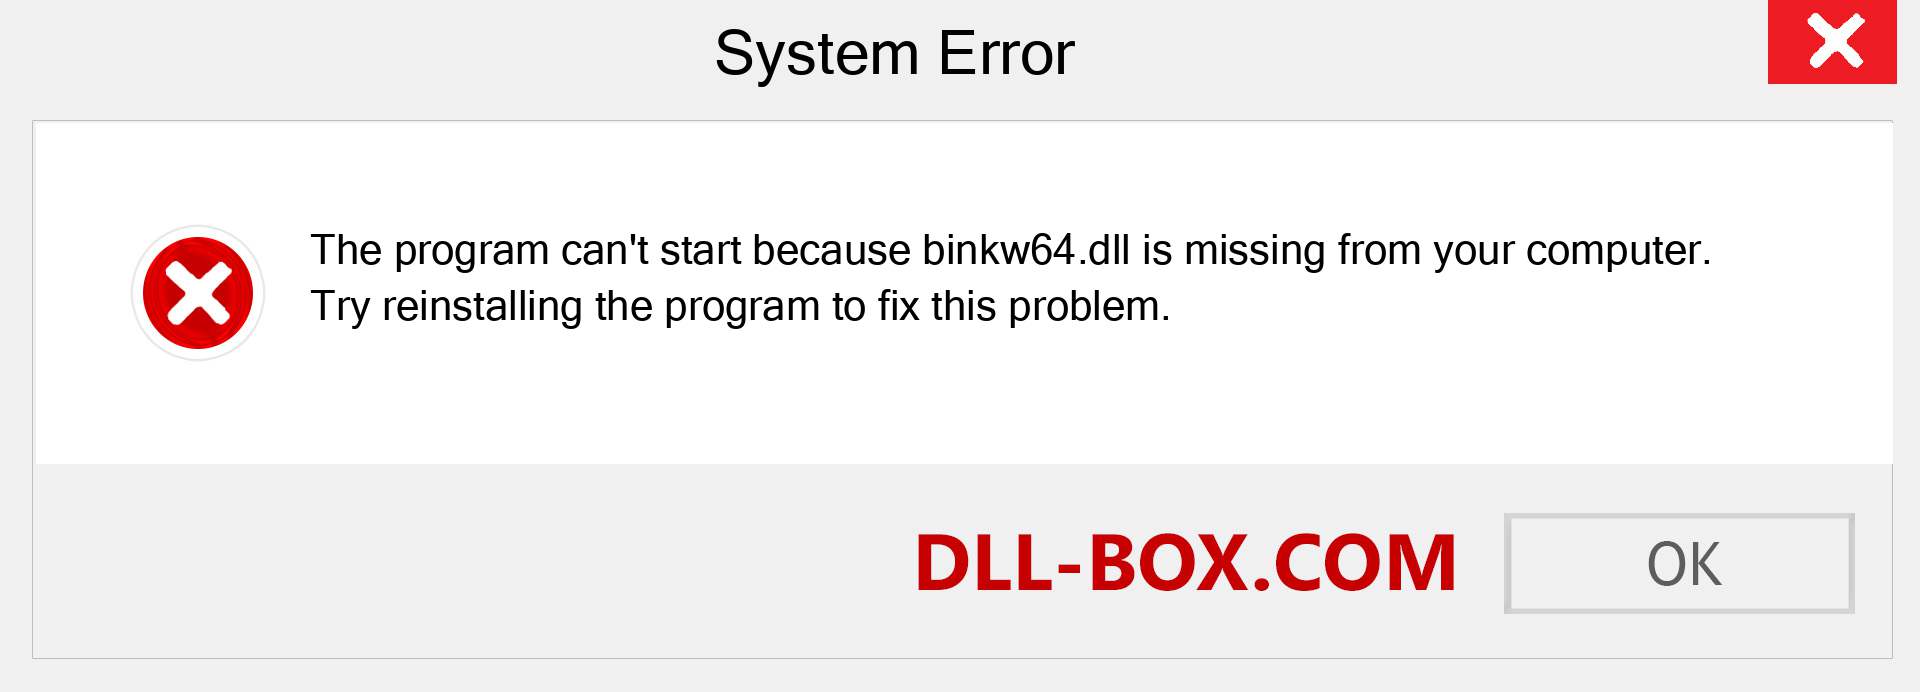  binkw64.dll file is missing?. Download for Windows 7, 8, 10 - Fix  binkw64 dll Missing Error on Windows, photos, images